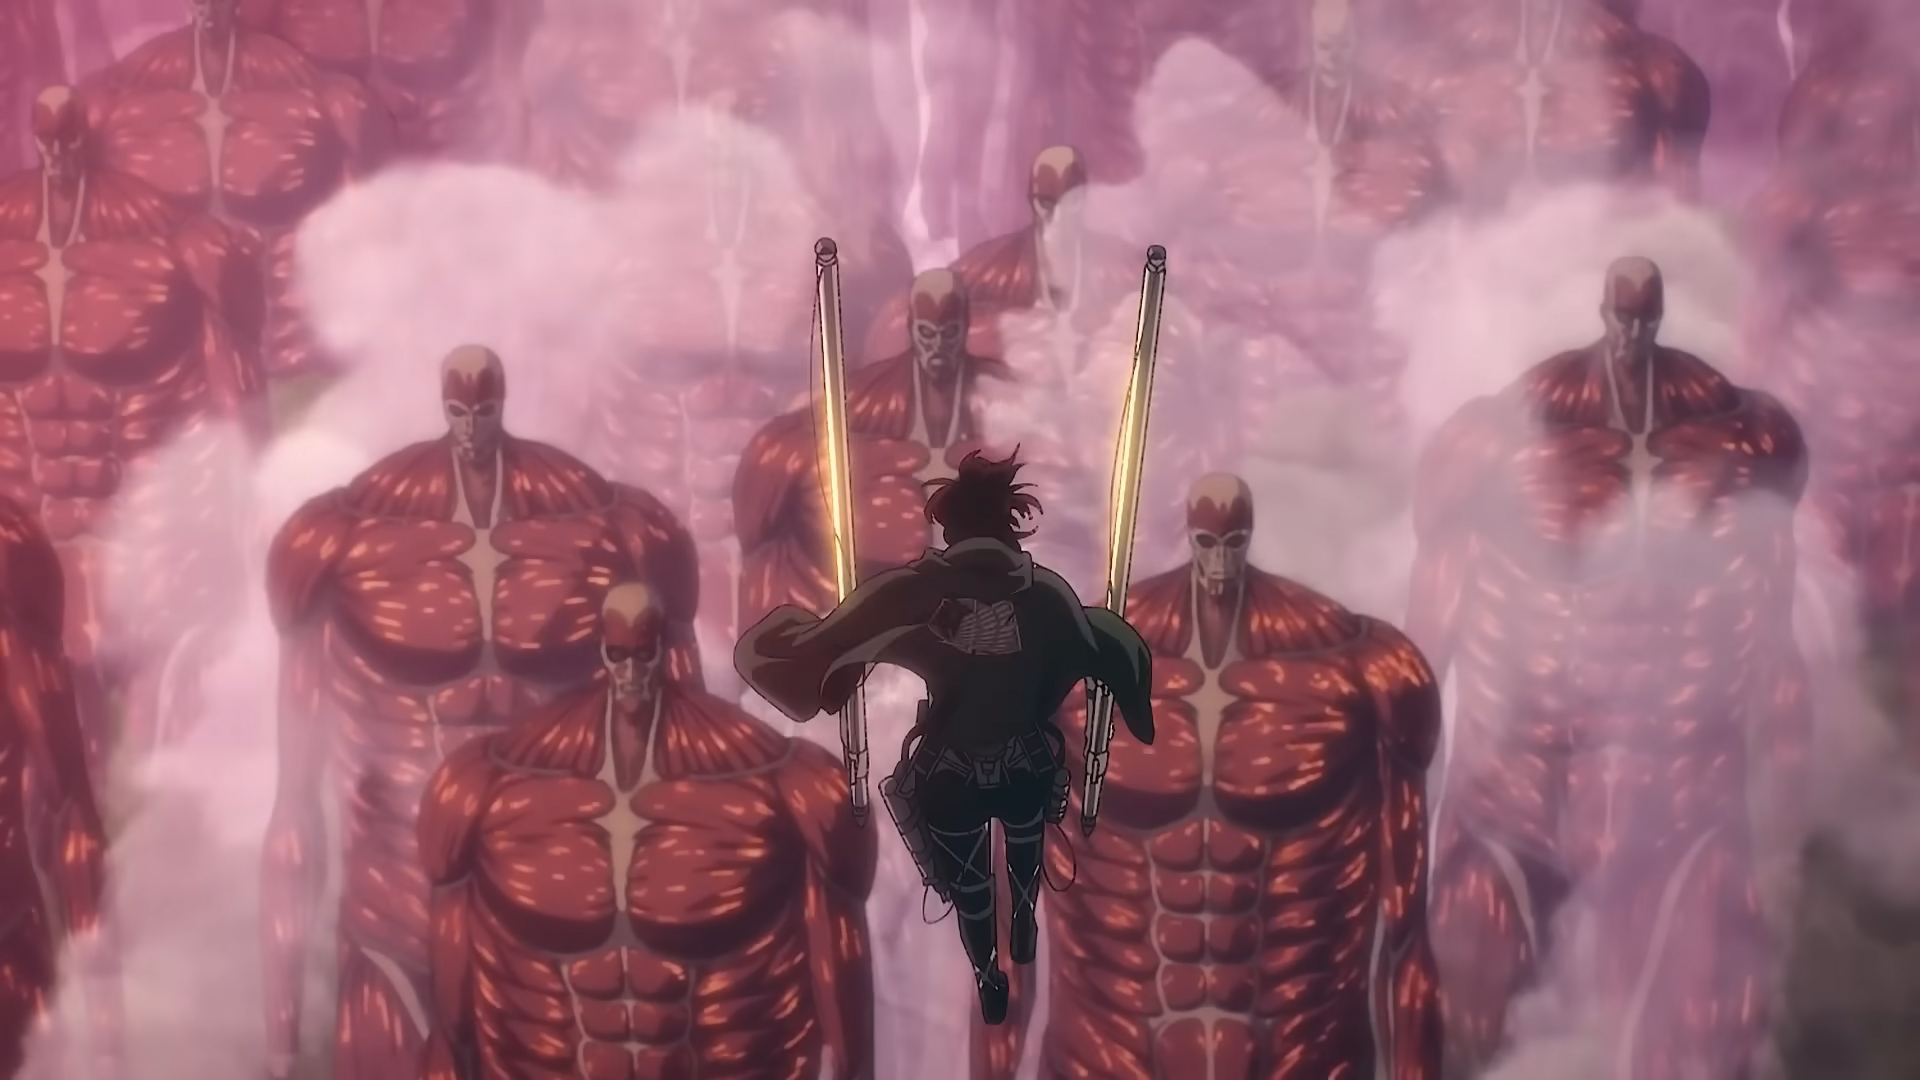 Attack on Titan – The Final Season: The Final Chapters Part 1